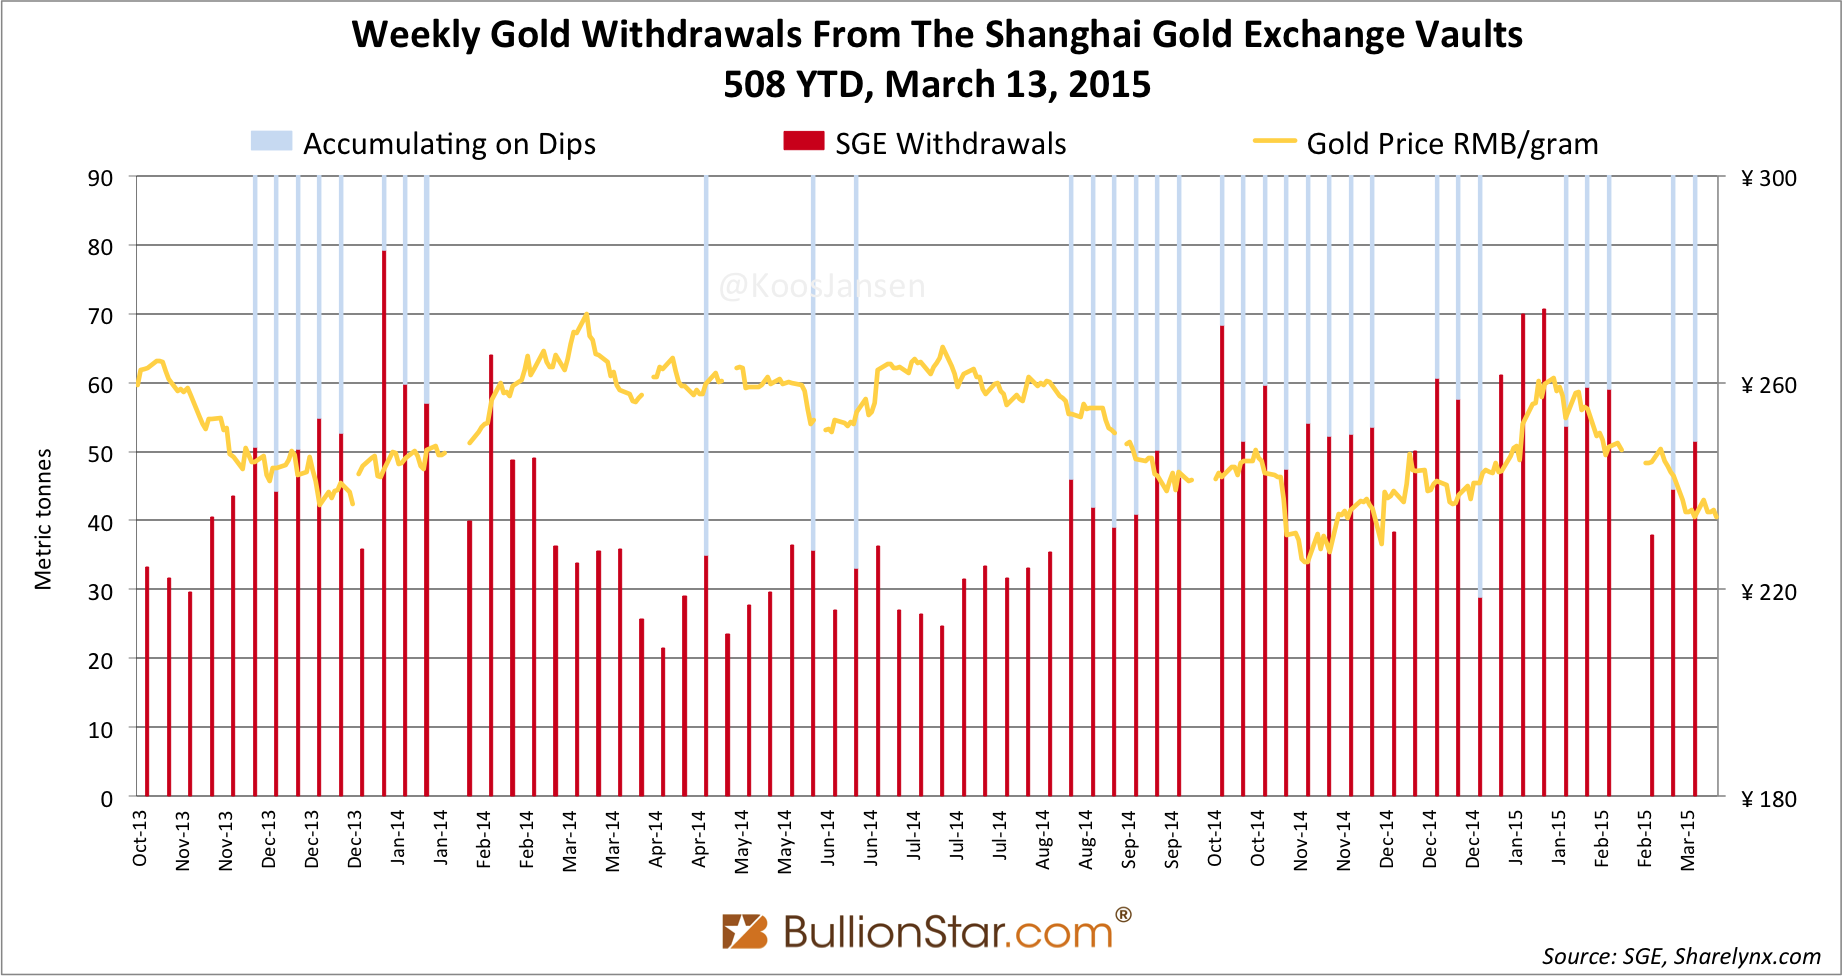 Shanghai Gold Exchange SGE withdrawals delivery only 2014 - 2015 week 10